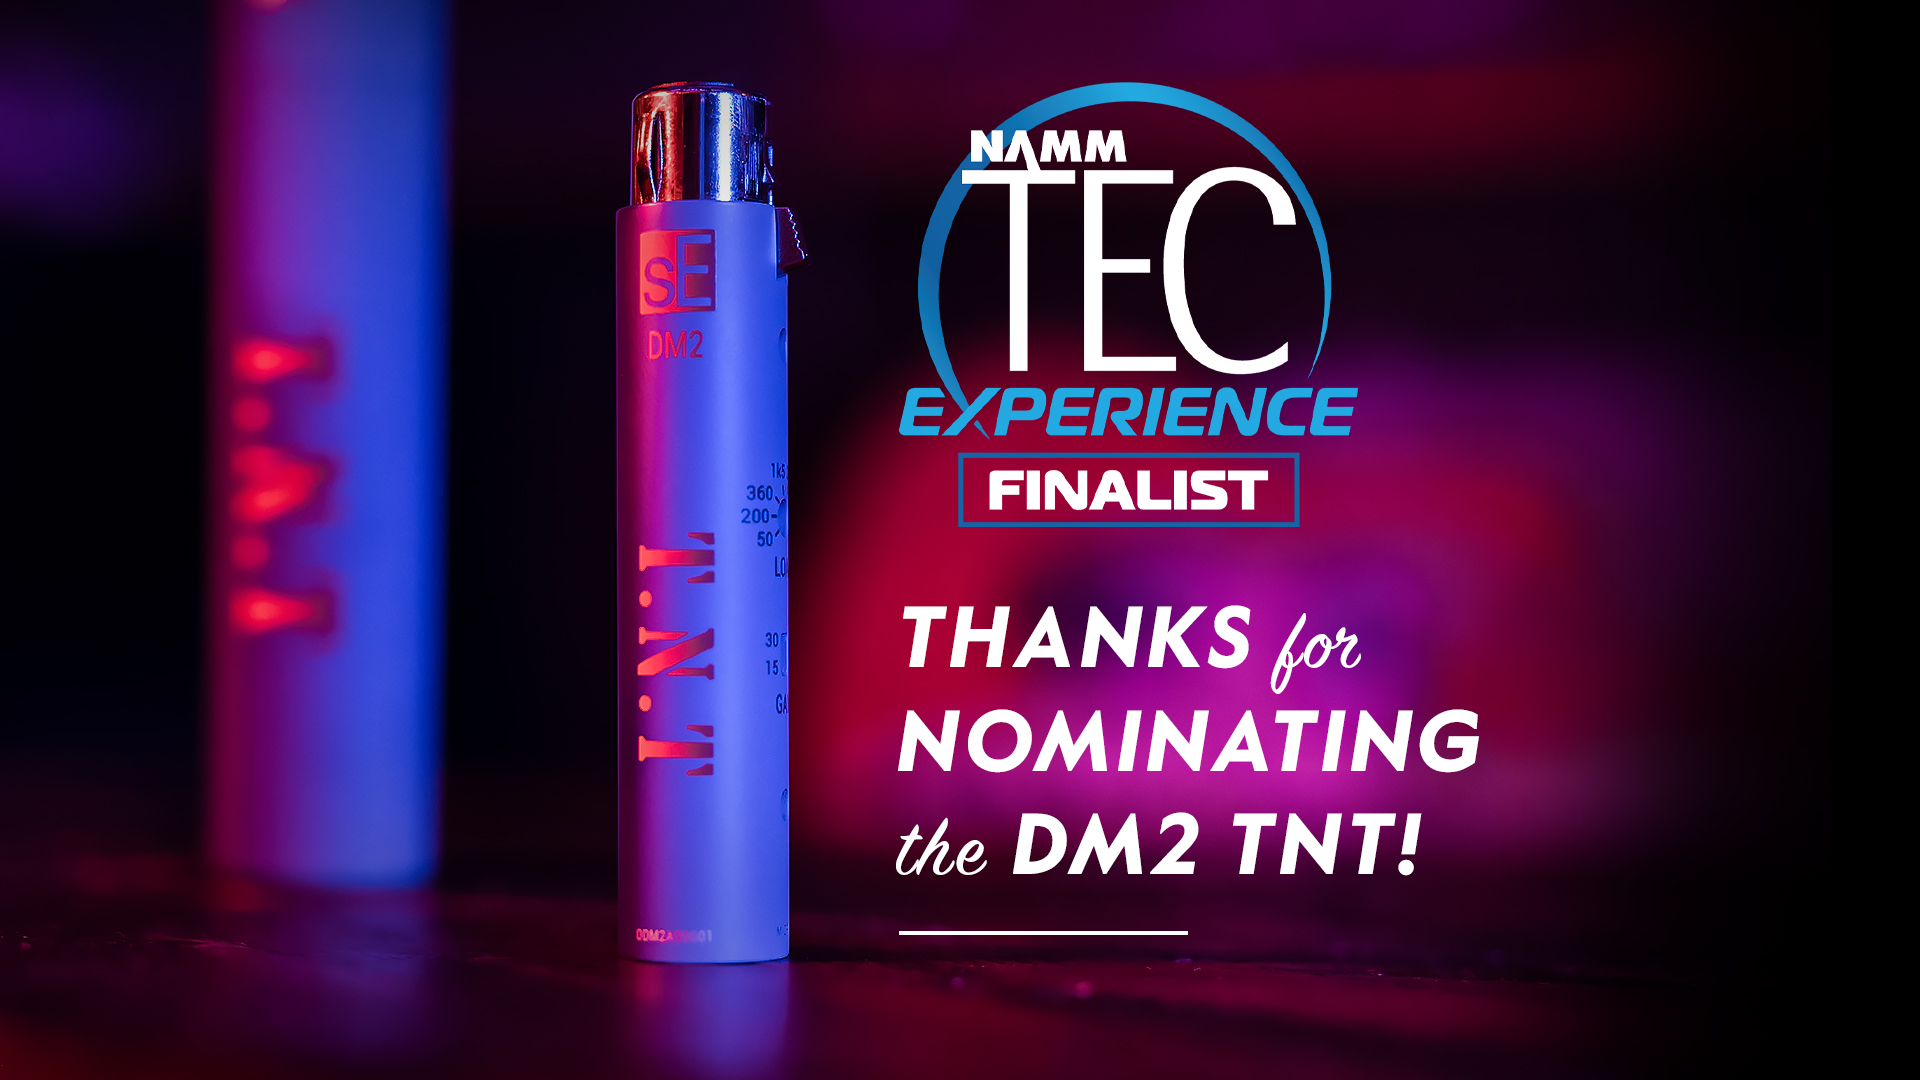 DM2 TNT - Nominated for the 38th Annual NAMM TEC Awards - sE